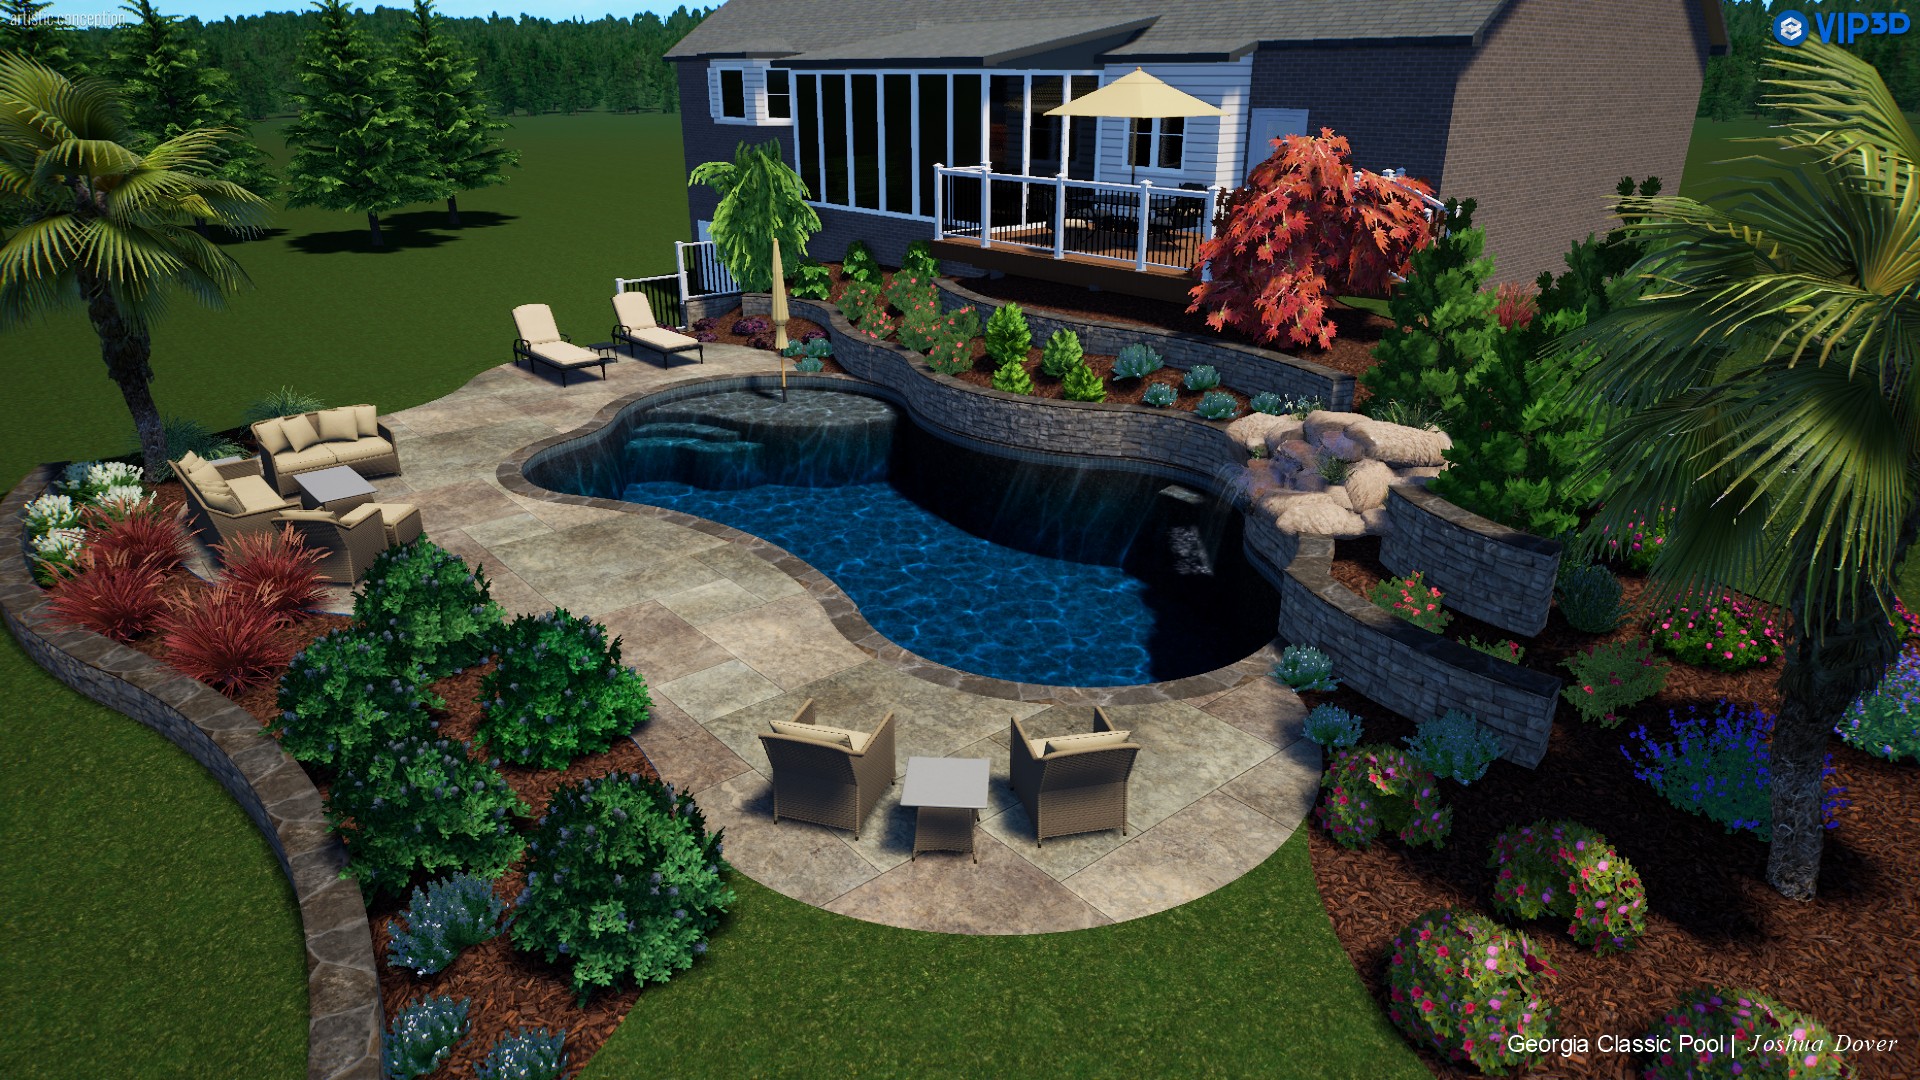 A 3D rendering of a modern pool with a boulder waterfall cascading into the pool.